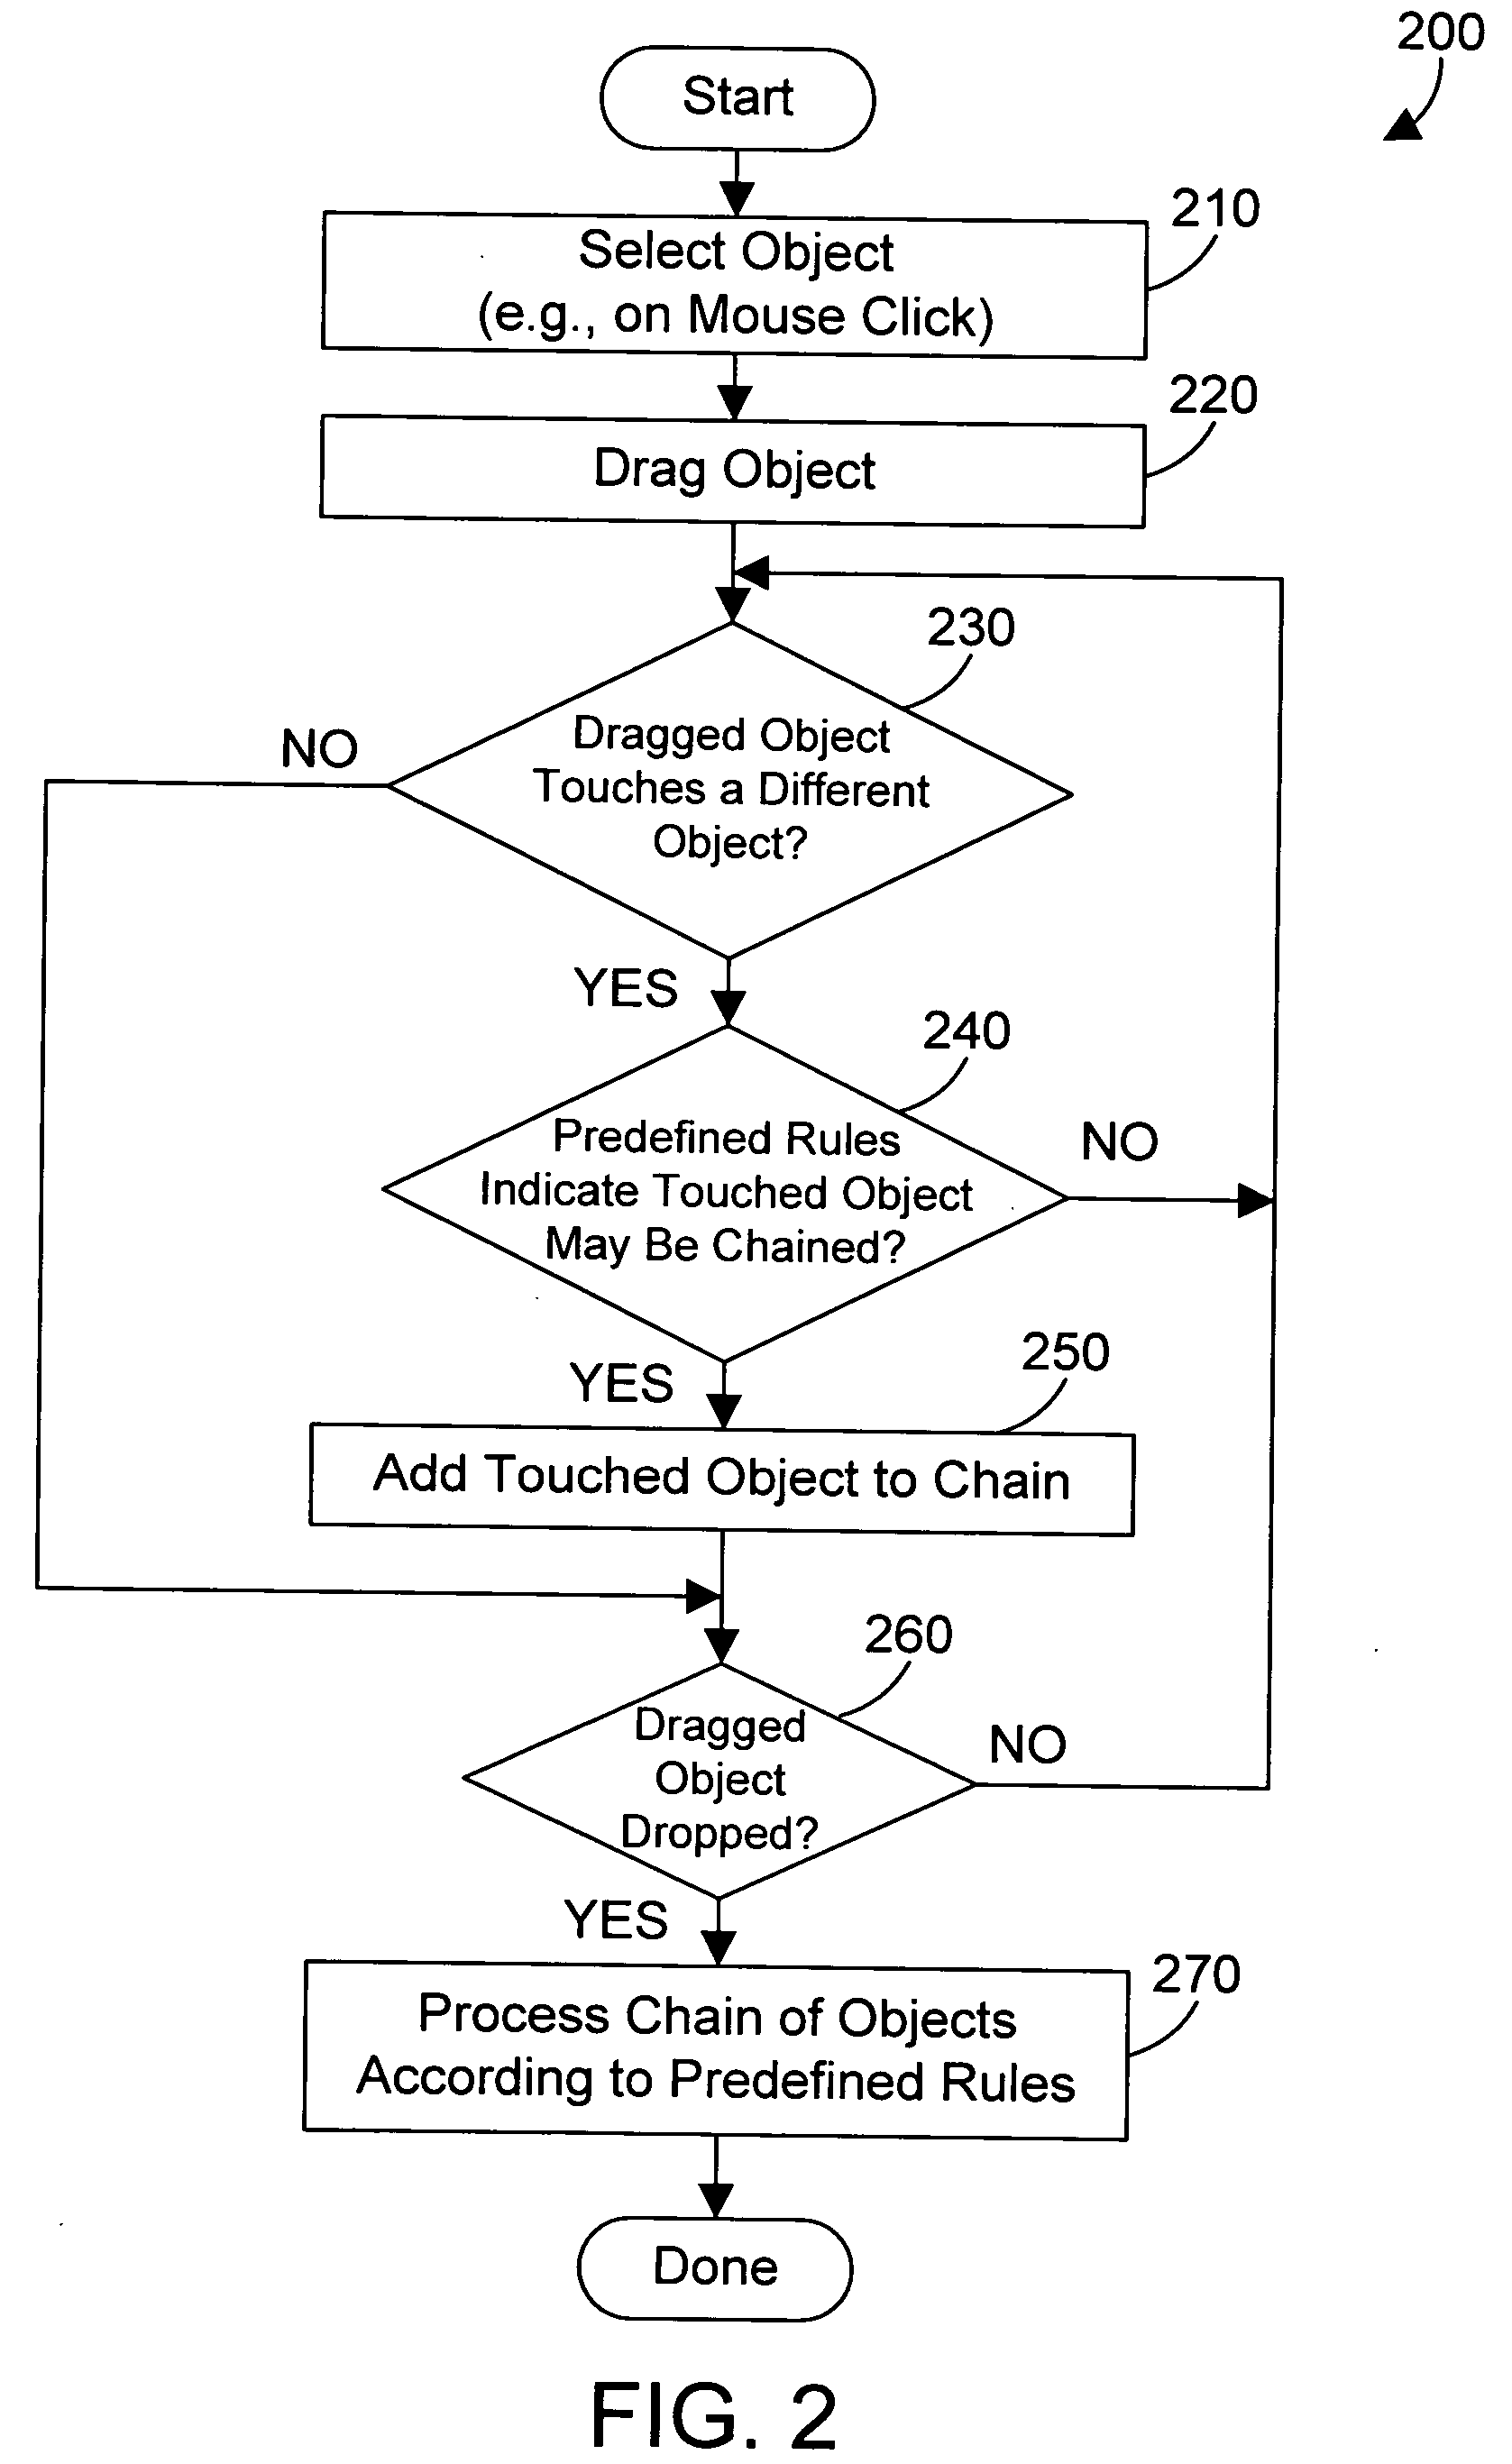 Apparatus and method for chaining objects in a pointer drag path